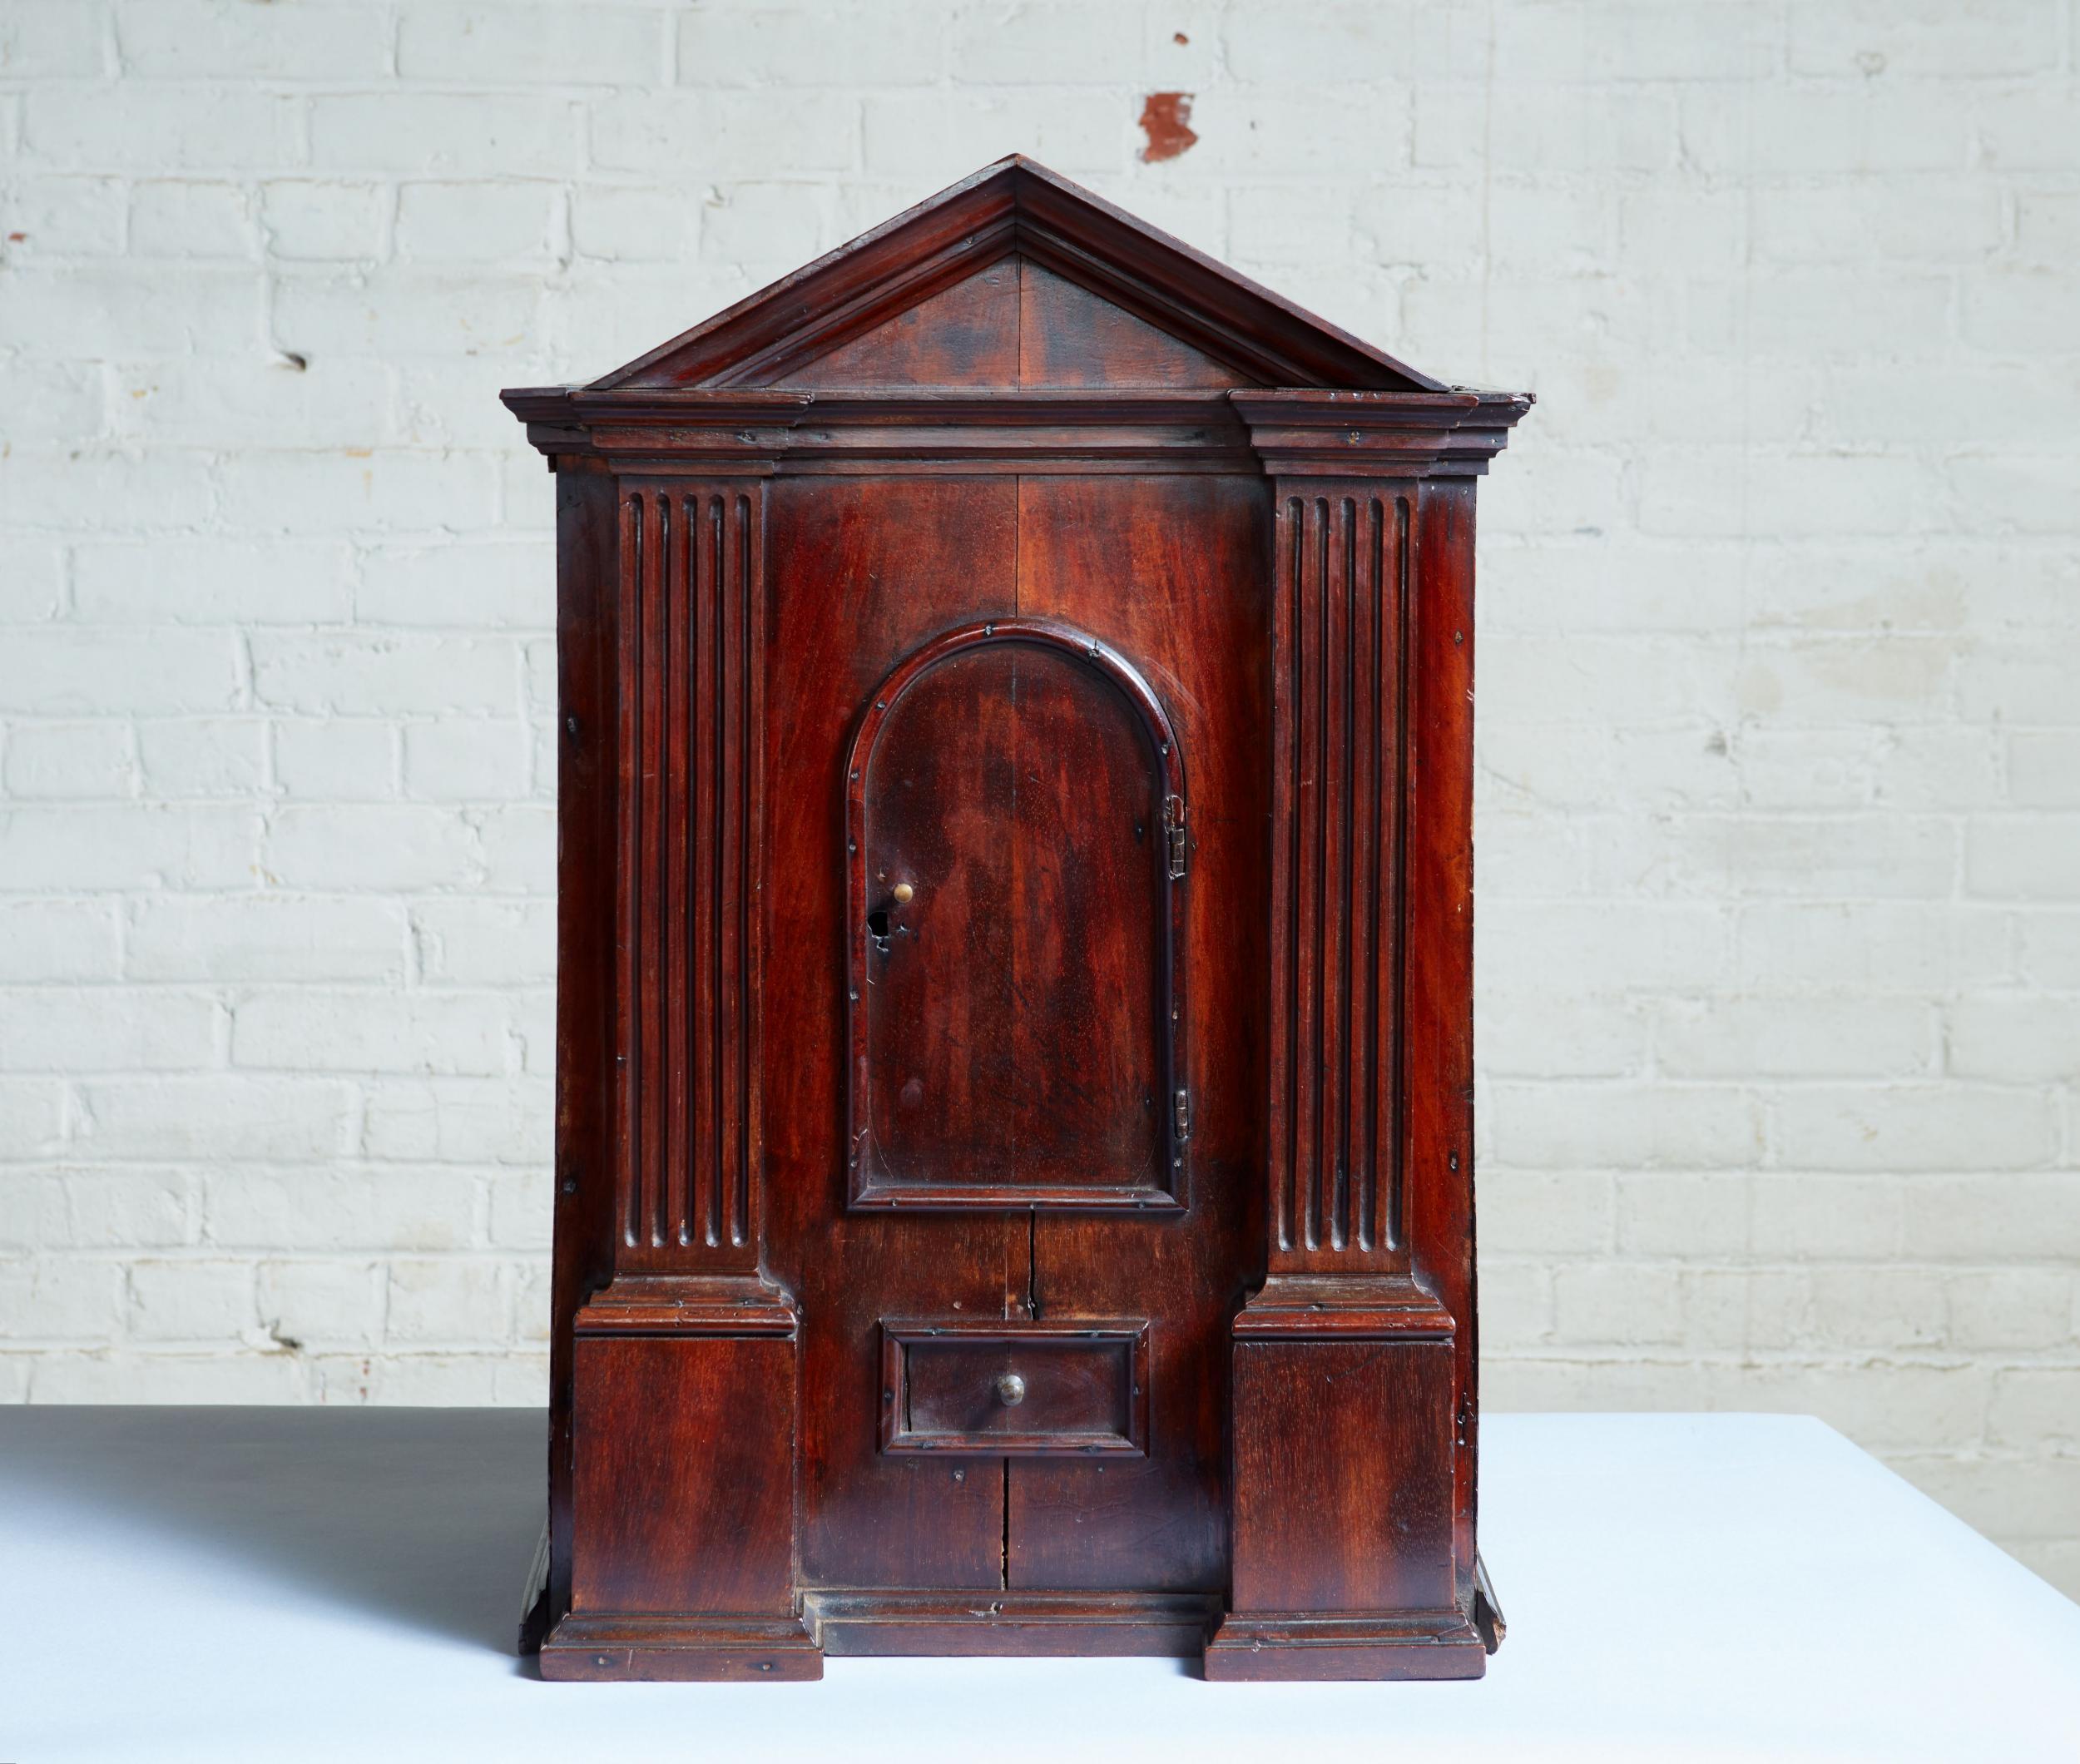 Rare early 18th century walnut Palladian diminutive cabinet of architectural form having a pedimented top over pair of pilasters flanking a single arched door and having a molded base, the whole retaining a lovely old finish and great patina.